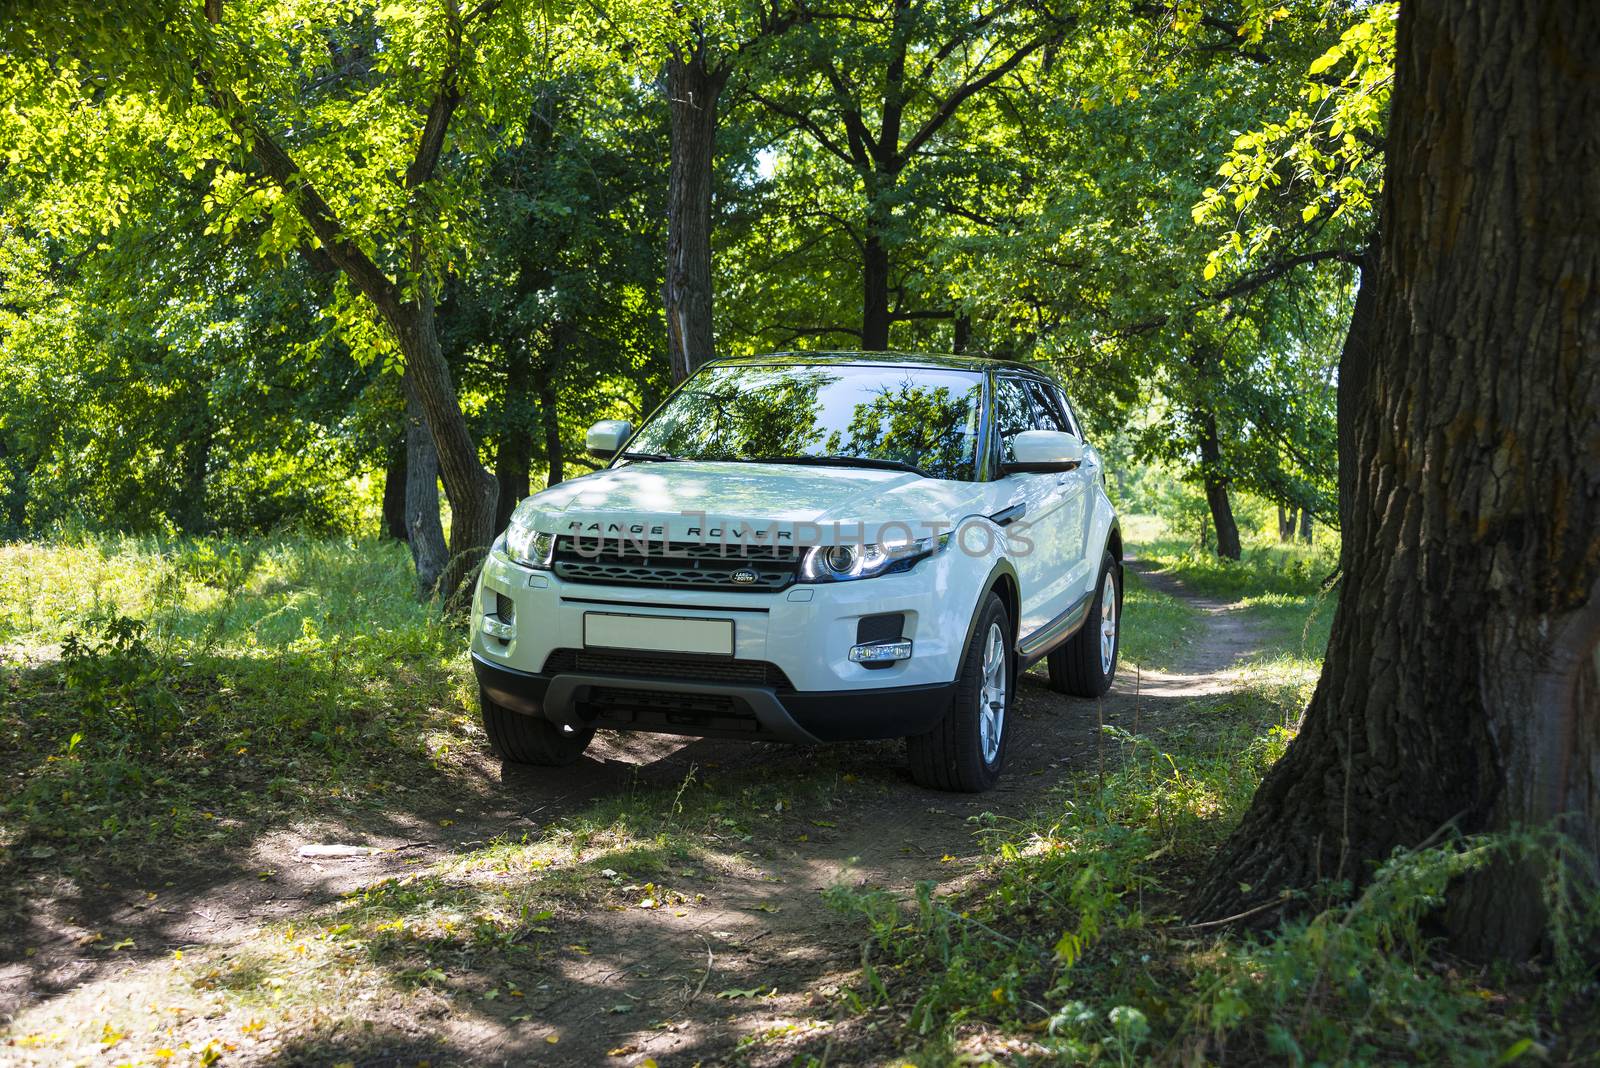 Car Land Rover Range Rover in summer Sunny weather in the summer landscape of the Samara region, Russia. August 21, 2018 by butenkow